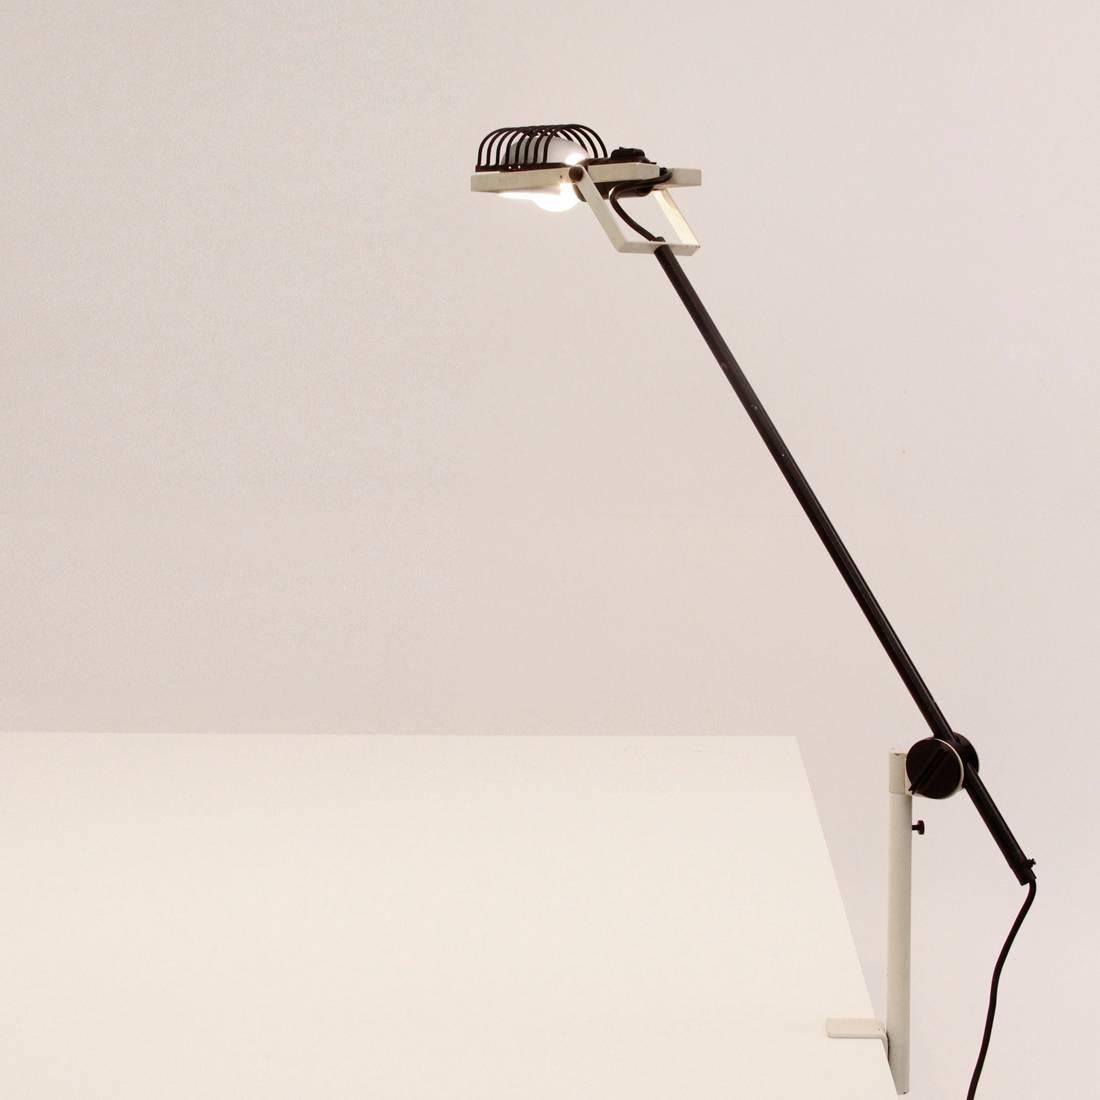 Table lamp, a clamp, designed by Ernesto Gismondi for Artemide in 1975.
Structure in black and white lacquered metal, with diffuser in anodized aluminium.
Good general condition, normal signs of use.

Dimensions: Height 90 cm, Diffuser width 20